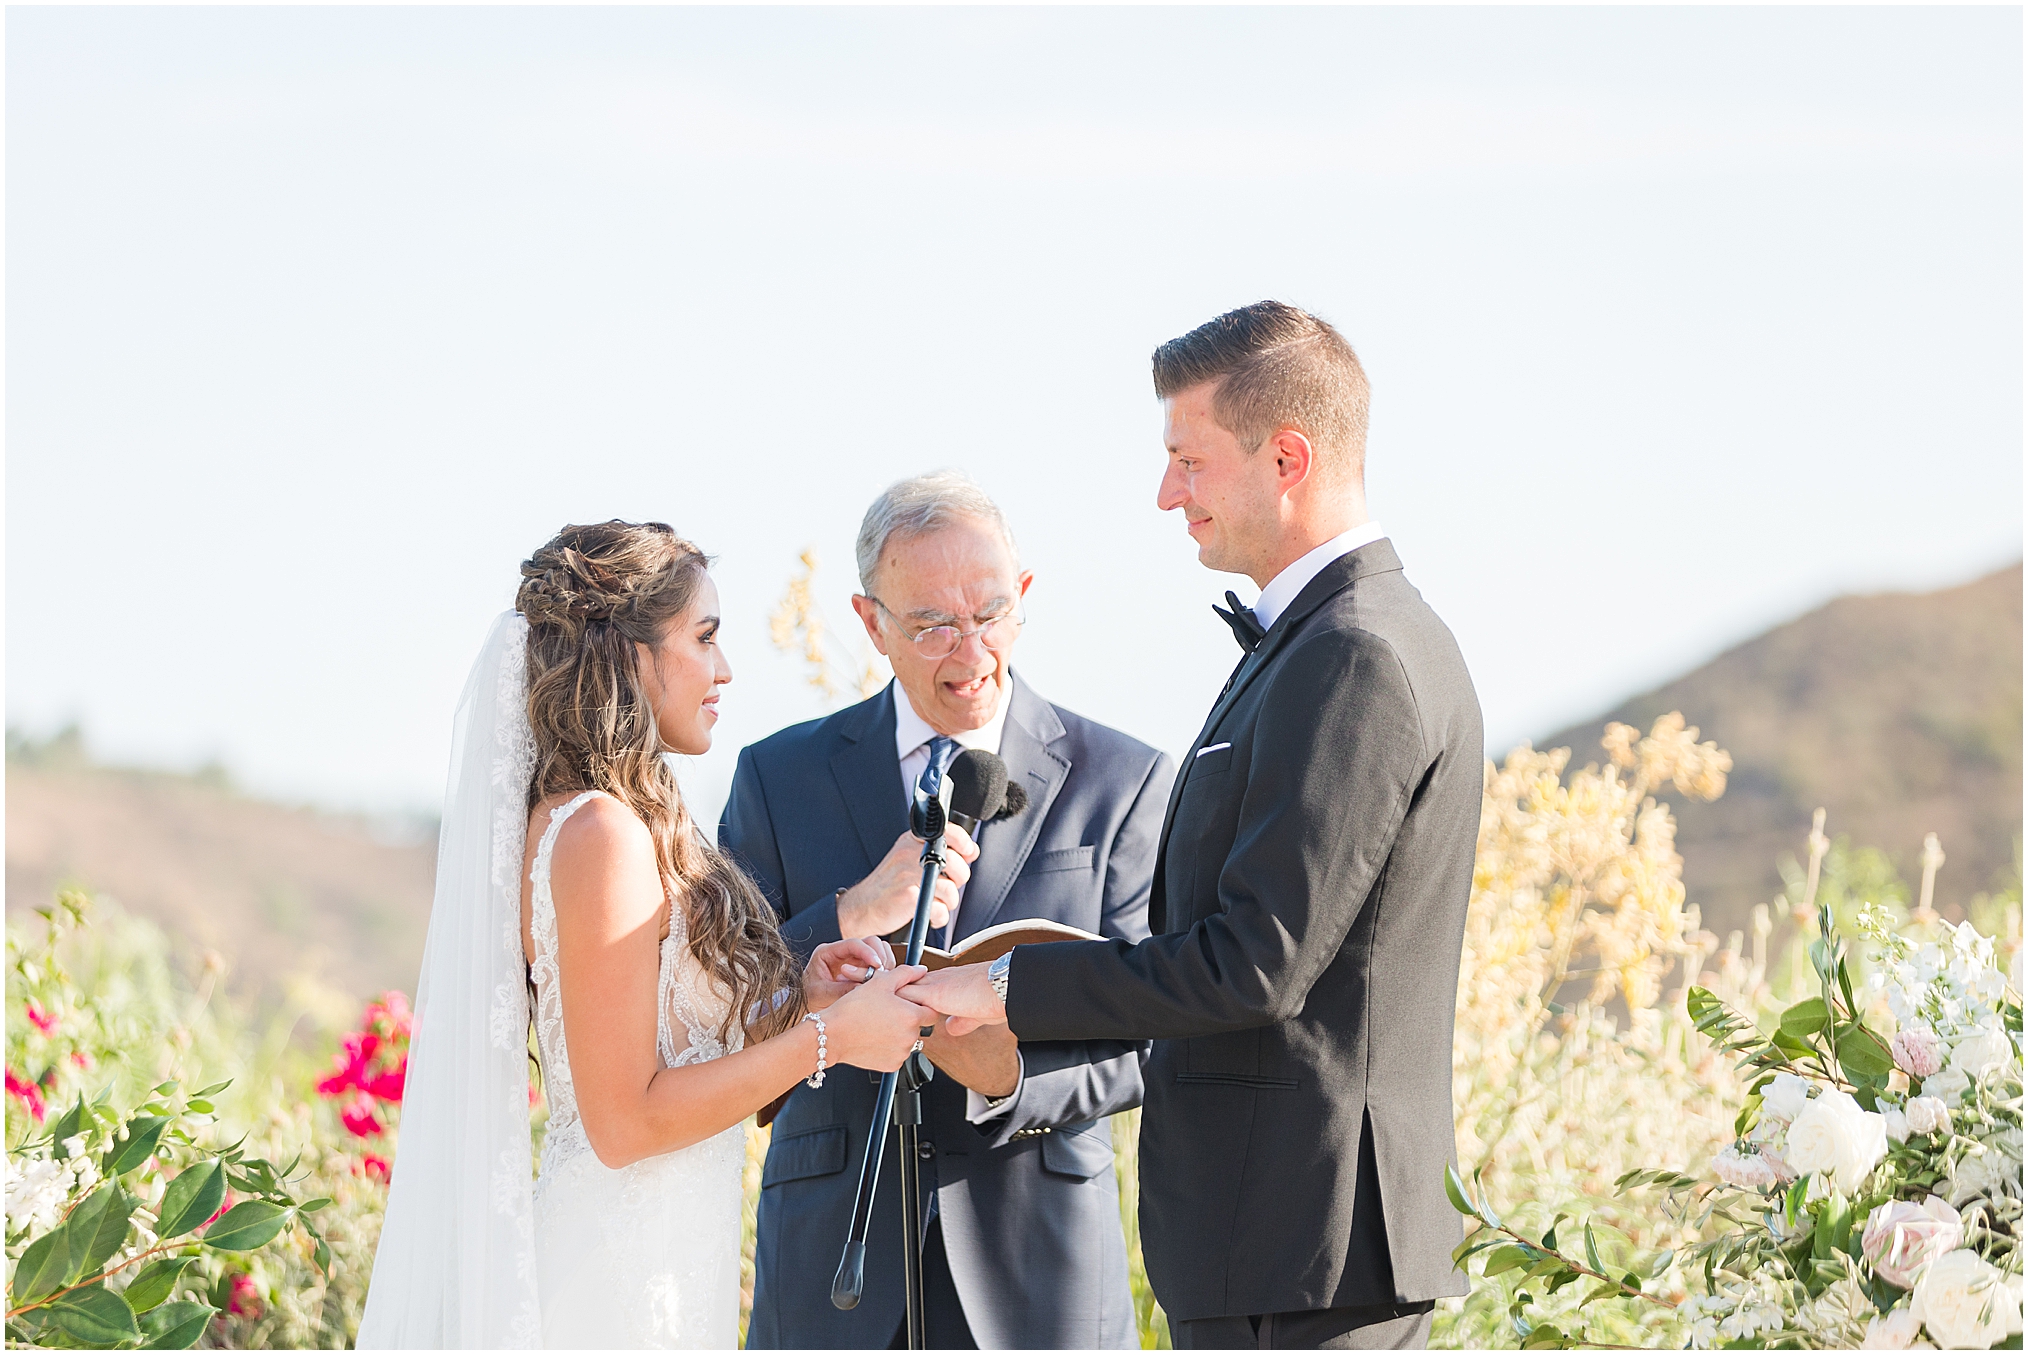 An intimate summer Malibu Canyon wedding in early September. Tiffany and Jason say "I do!" on a hilltop with 360 views of Malibu Canyon!